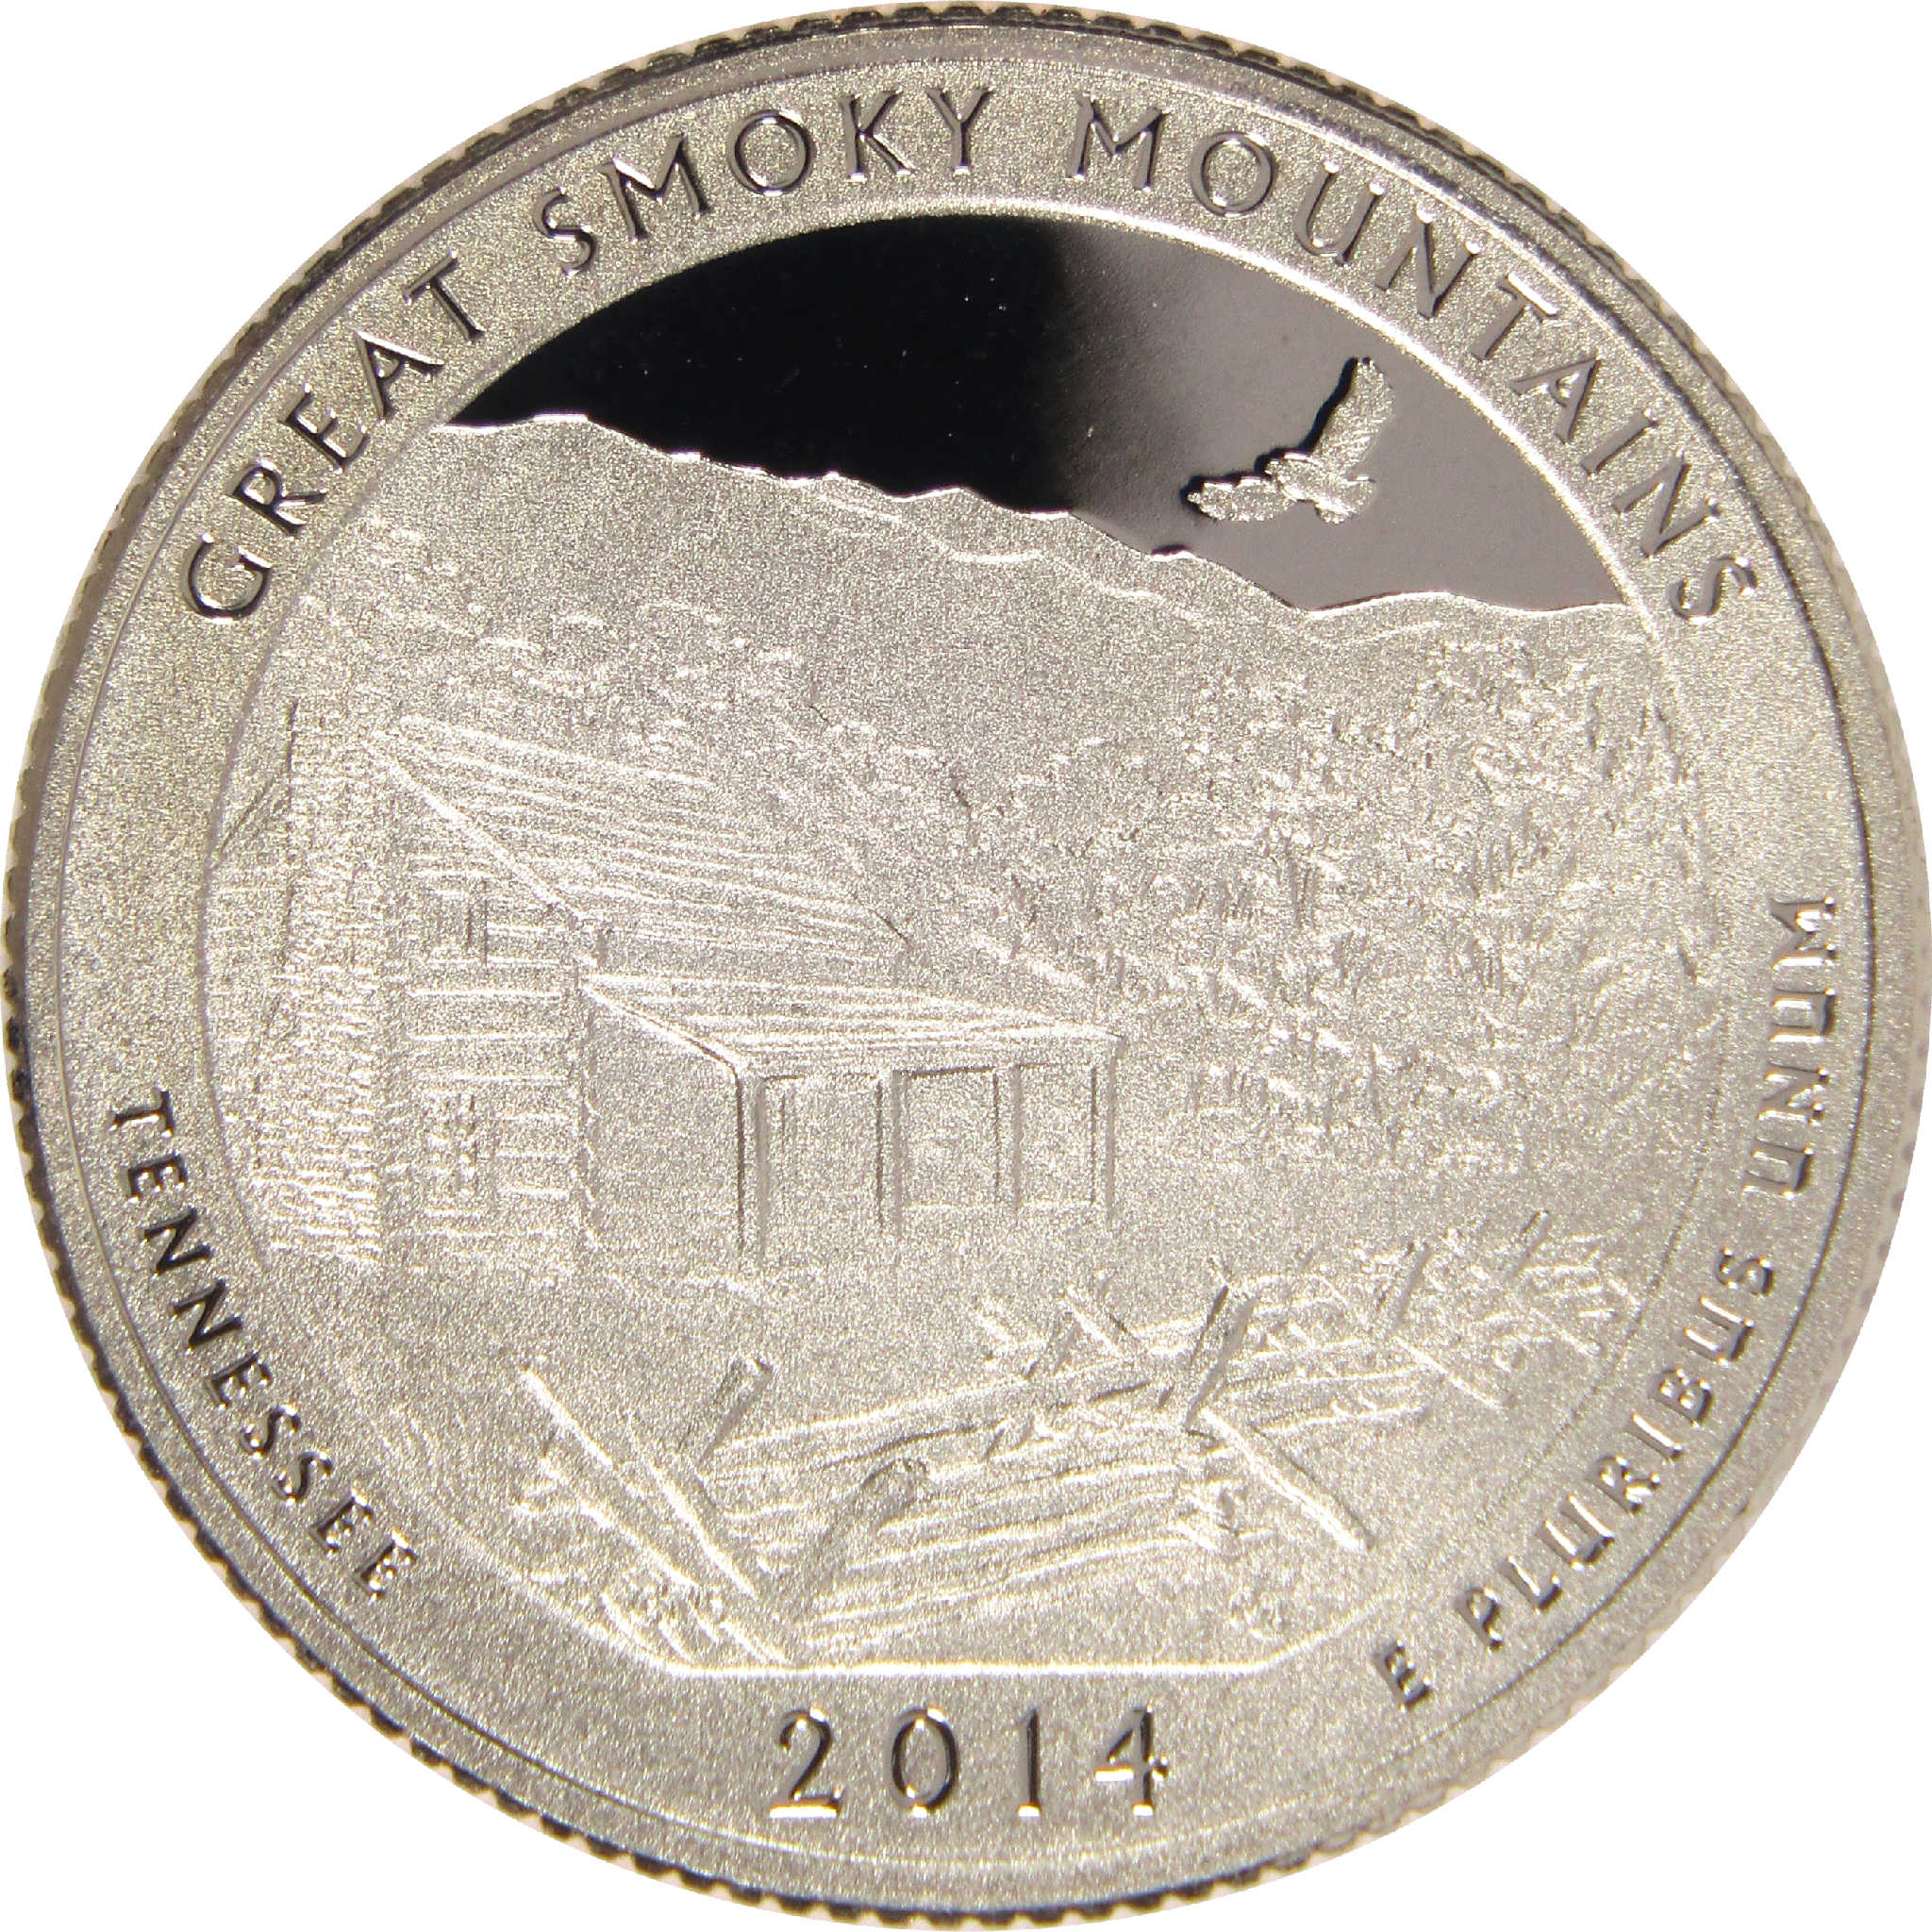 2014 S Great Smoky Mountains National Park Quarter Clad 25c Proof Coin